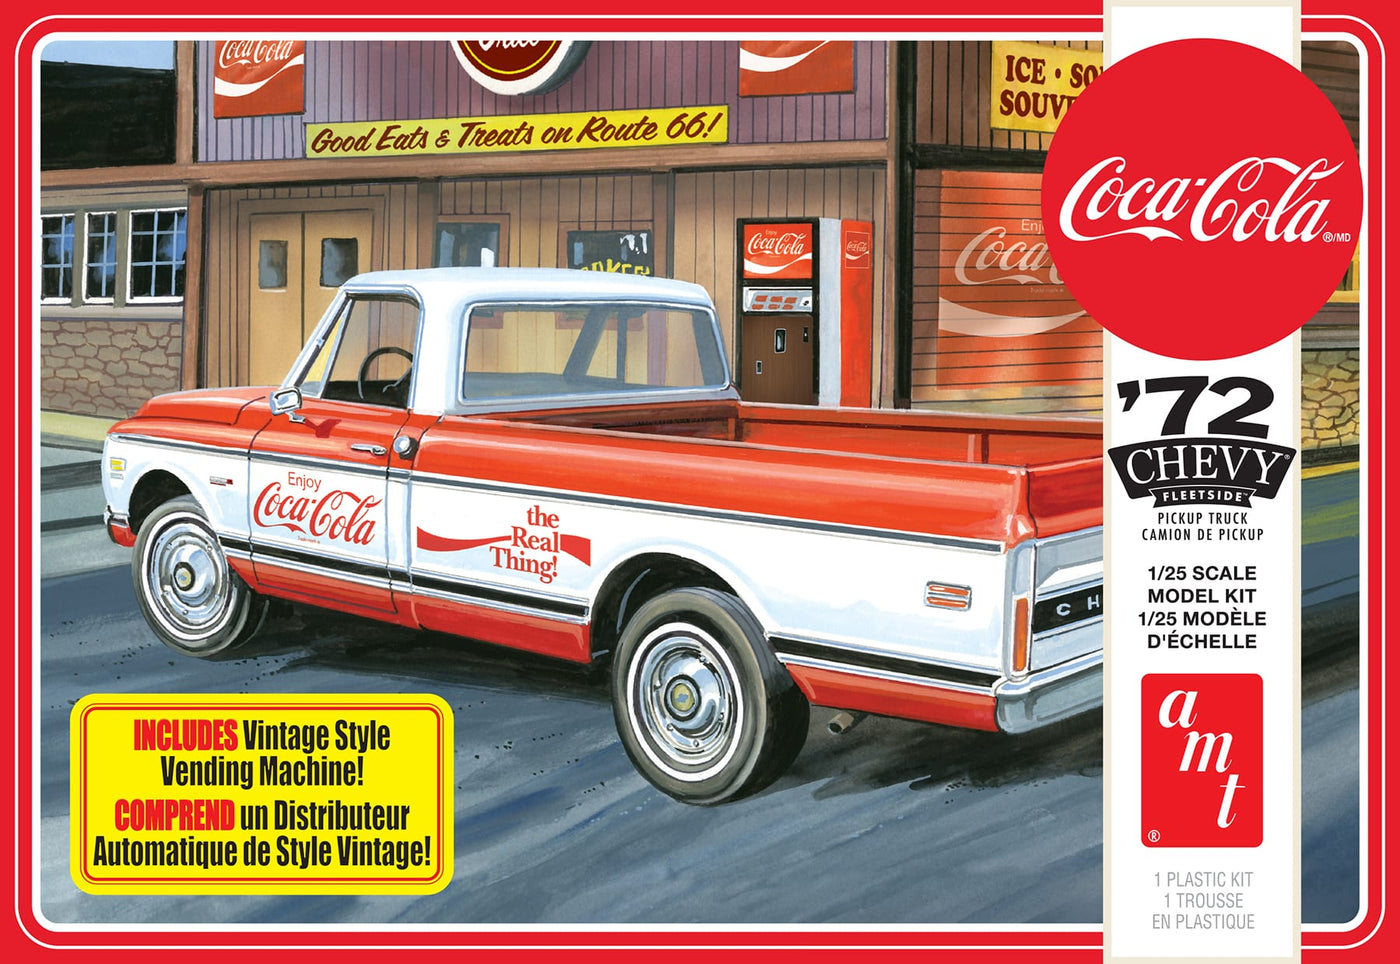 1/25 1972 Chevy Pickup w/Vending Machine and Crates CocaCola 2T Plastic Model Kit